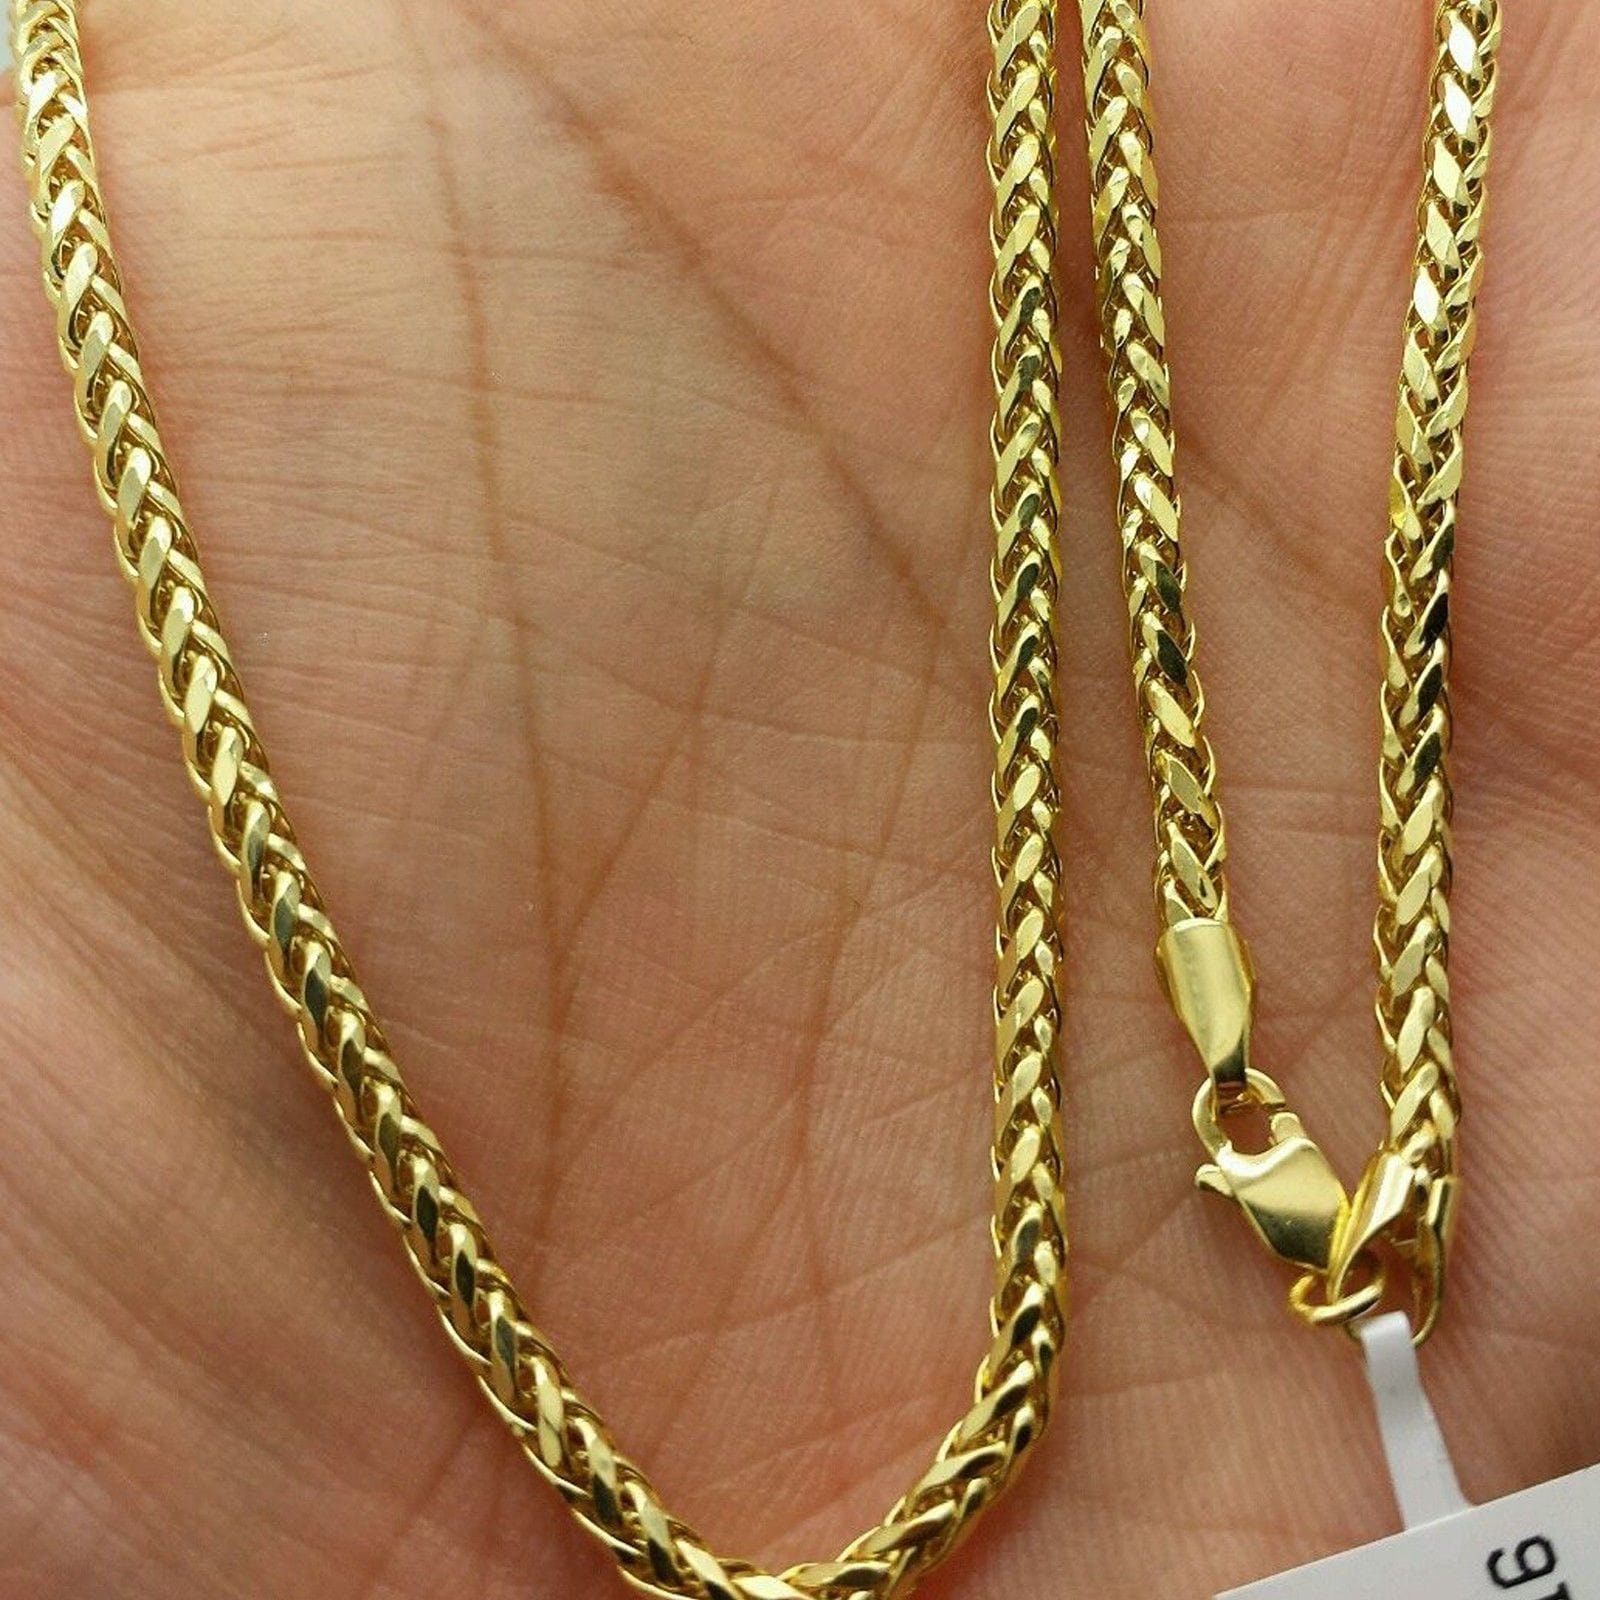 3mm gold franco chain on hand 